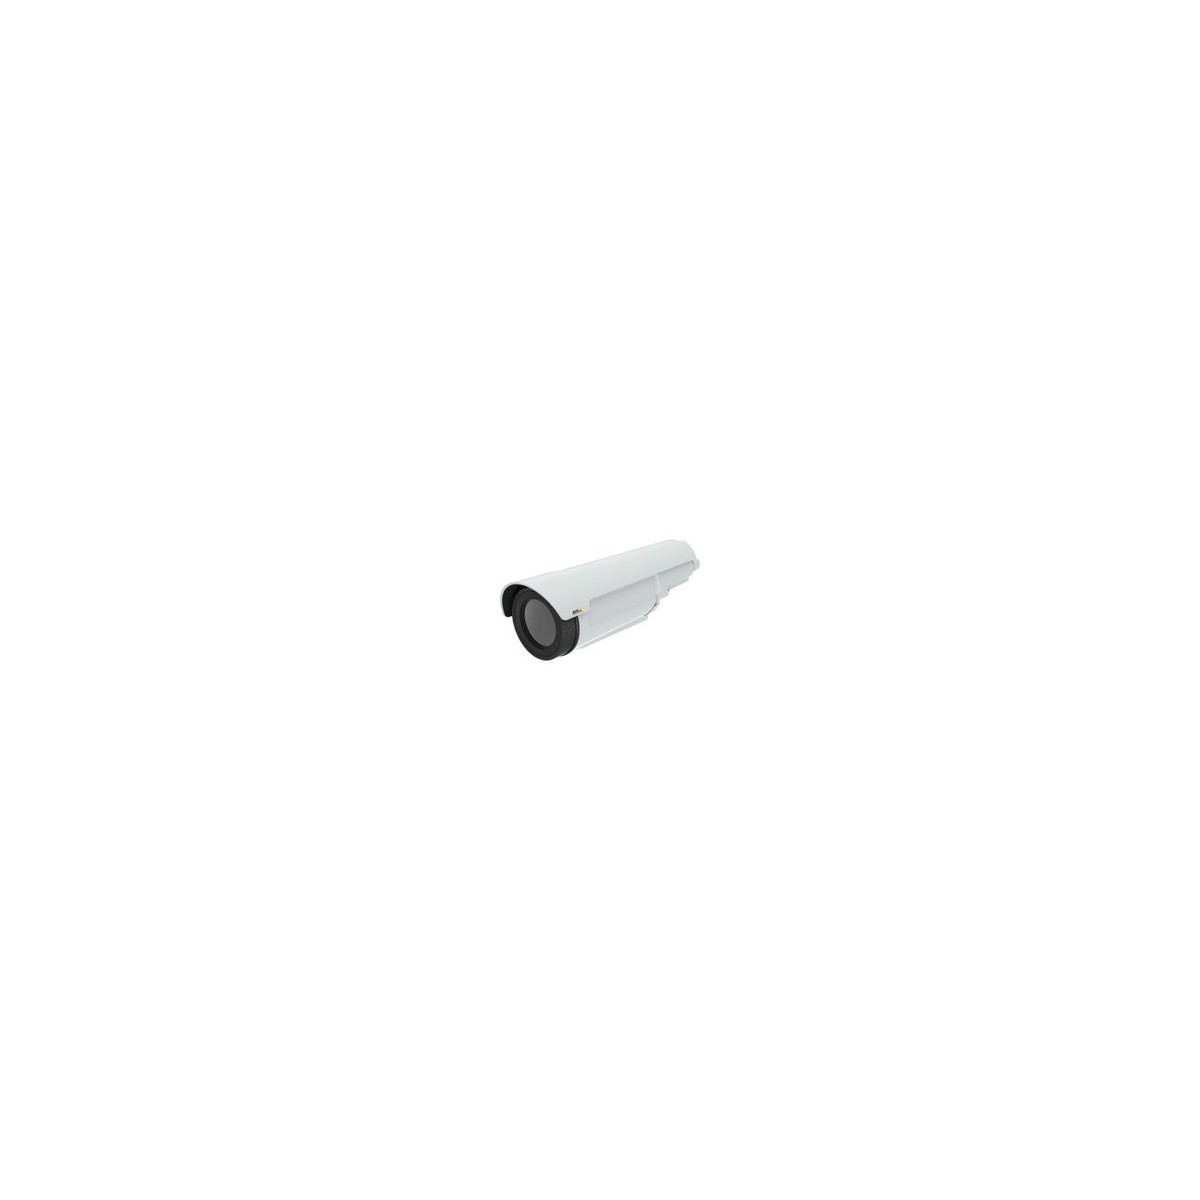 Axis 0983-001 - IP security camera - Outdoor - Wired - Multi - Ceiling-wall - Black - White